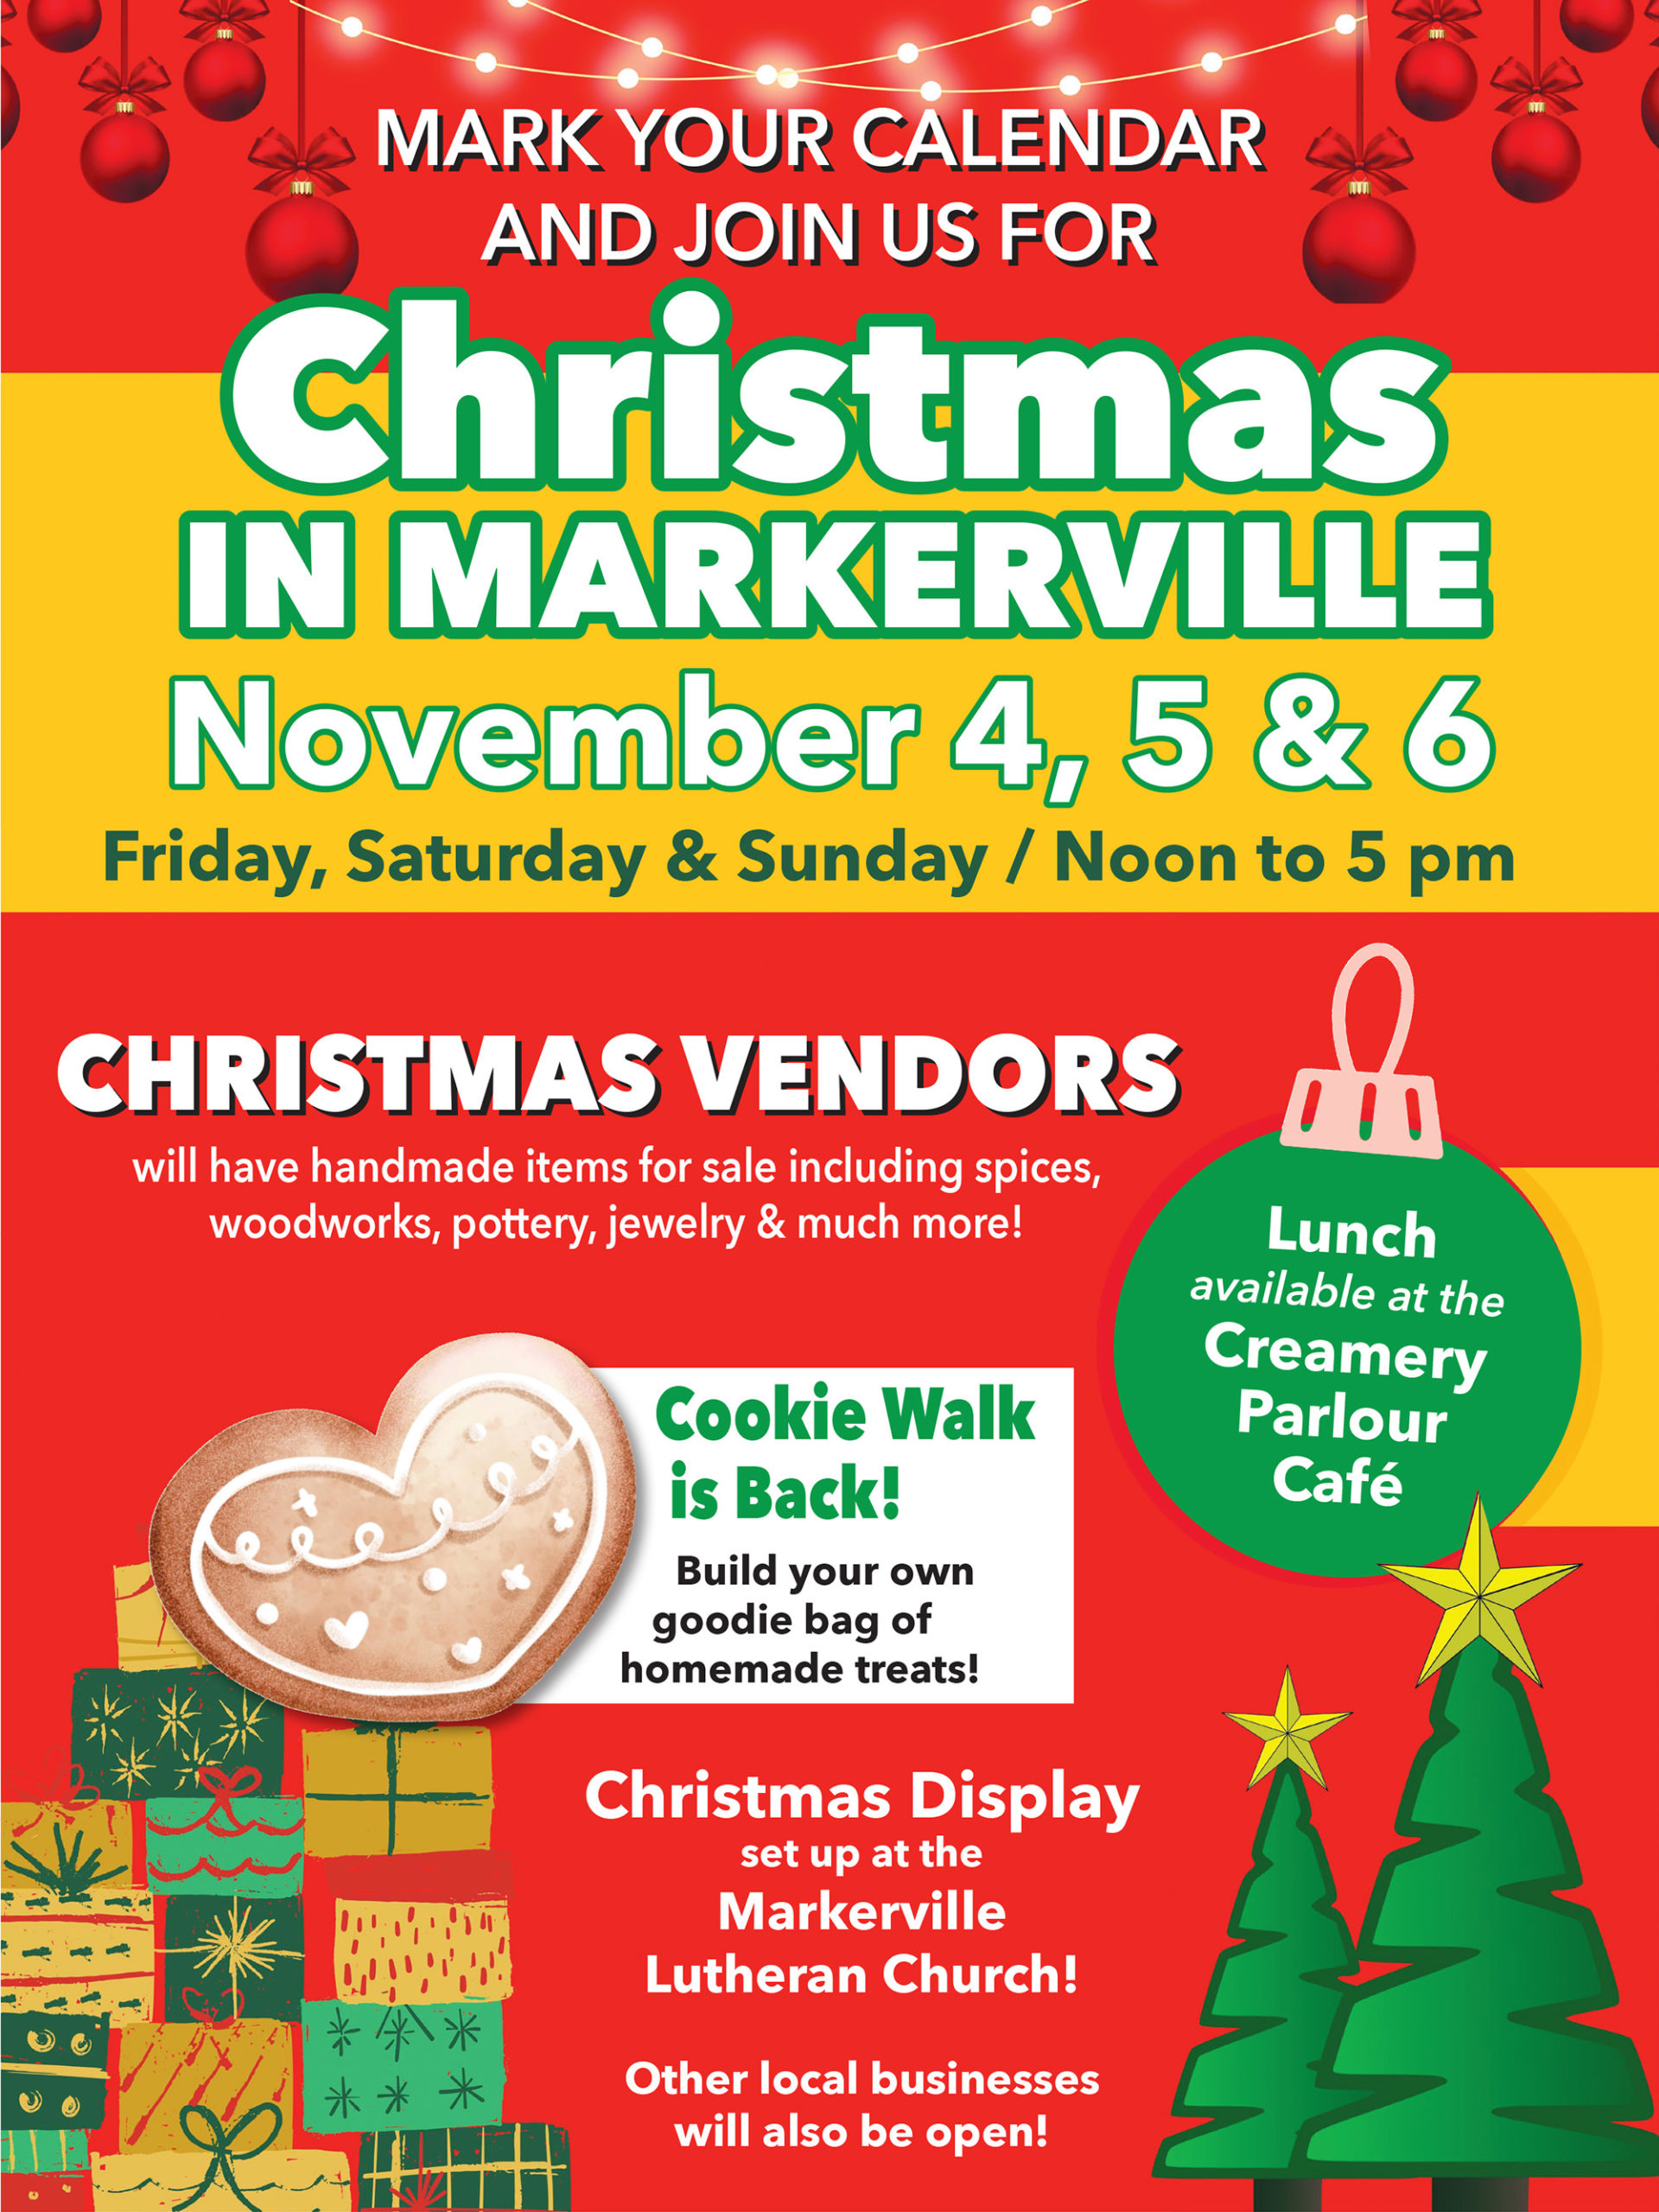 Christmas in Markerville is November 4 to 6 from Noon to 5 pm